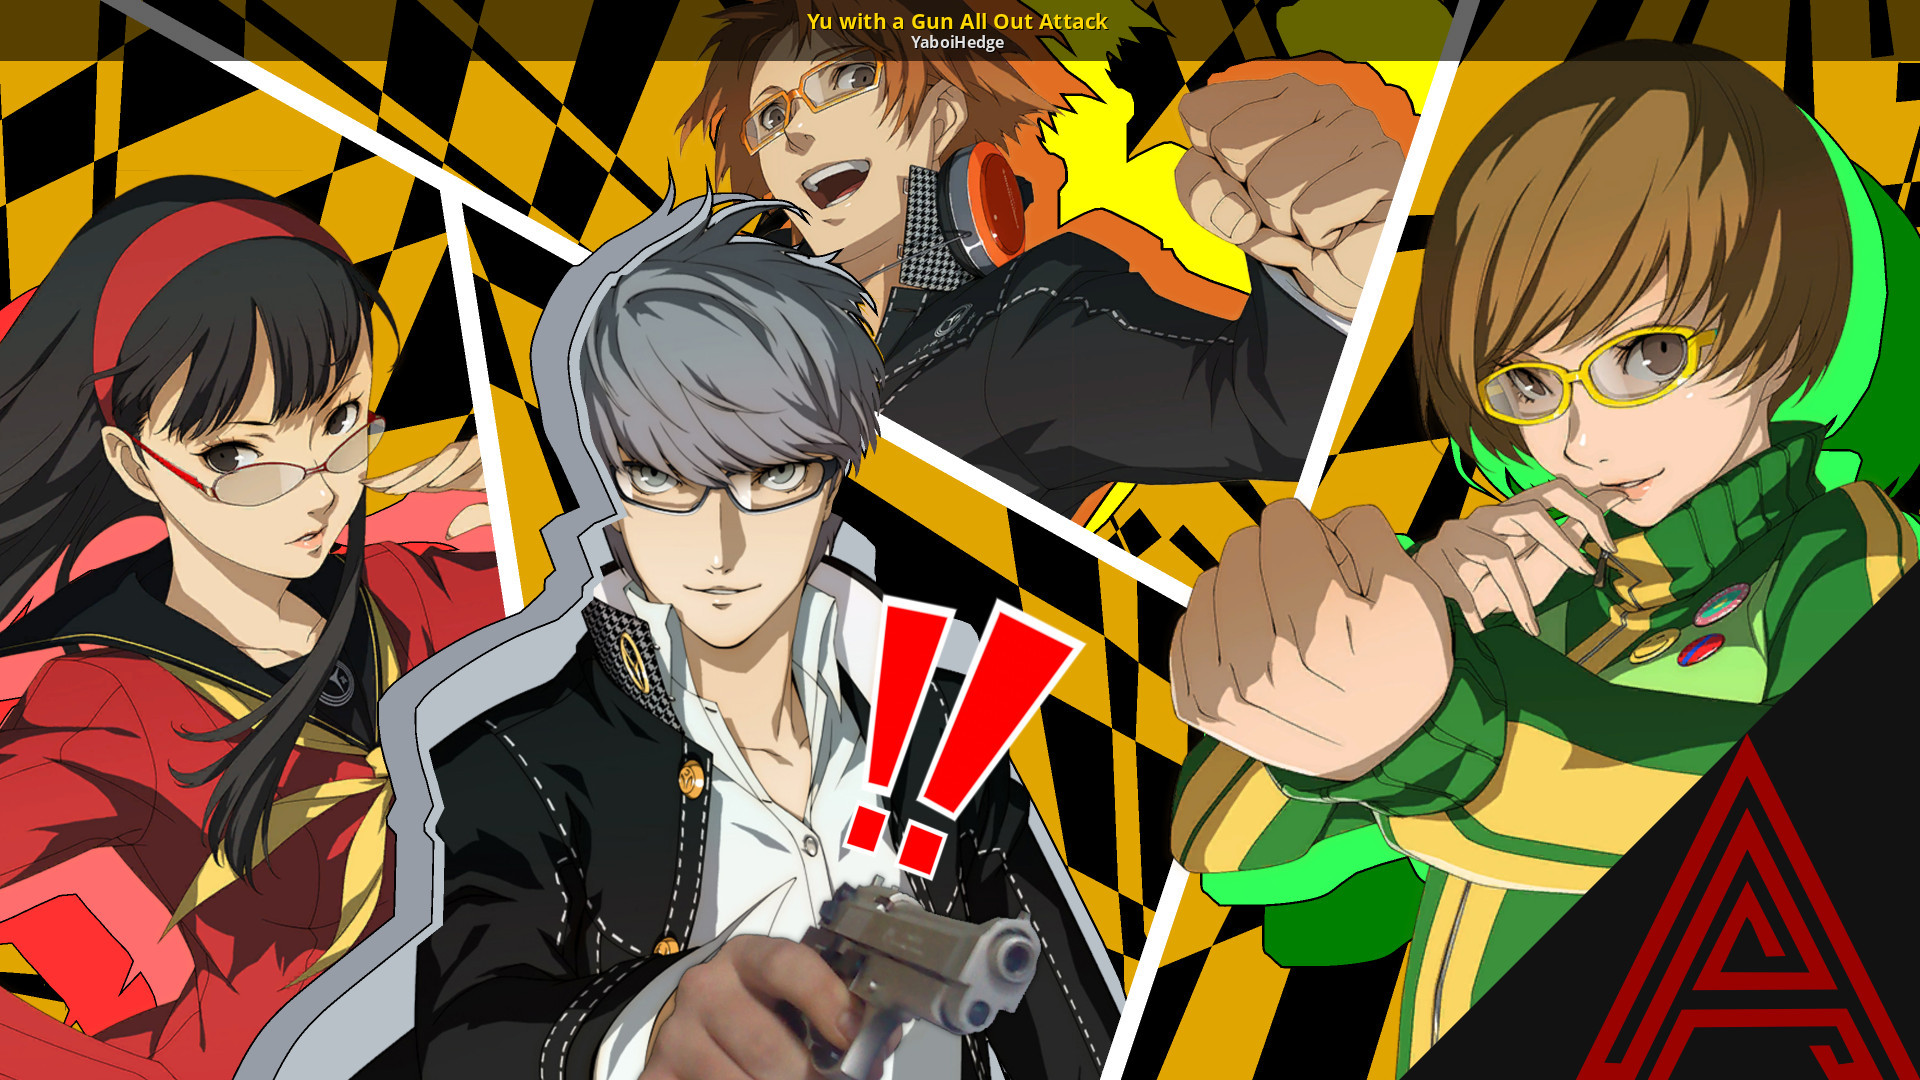 Yu with a Gun All Out Attack [Persona 4 Golden PC (32 Bit)] [Mods]